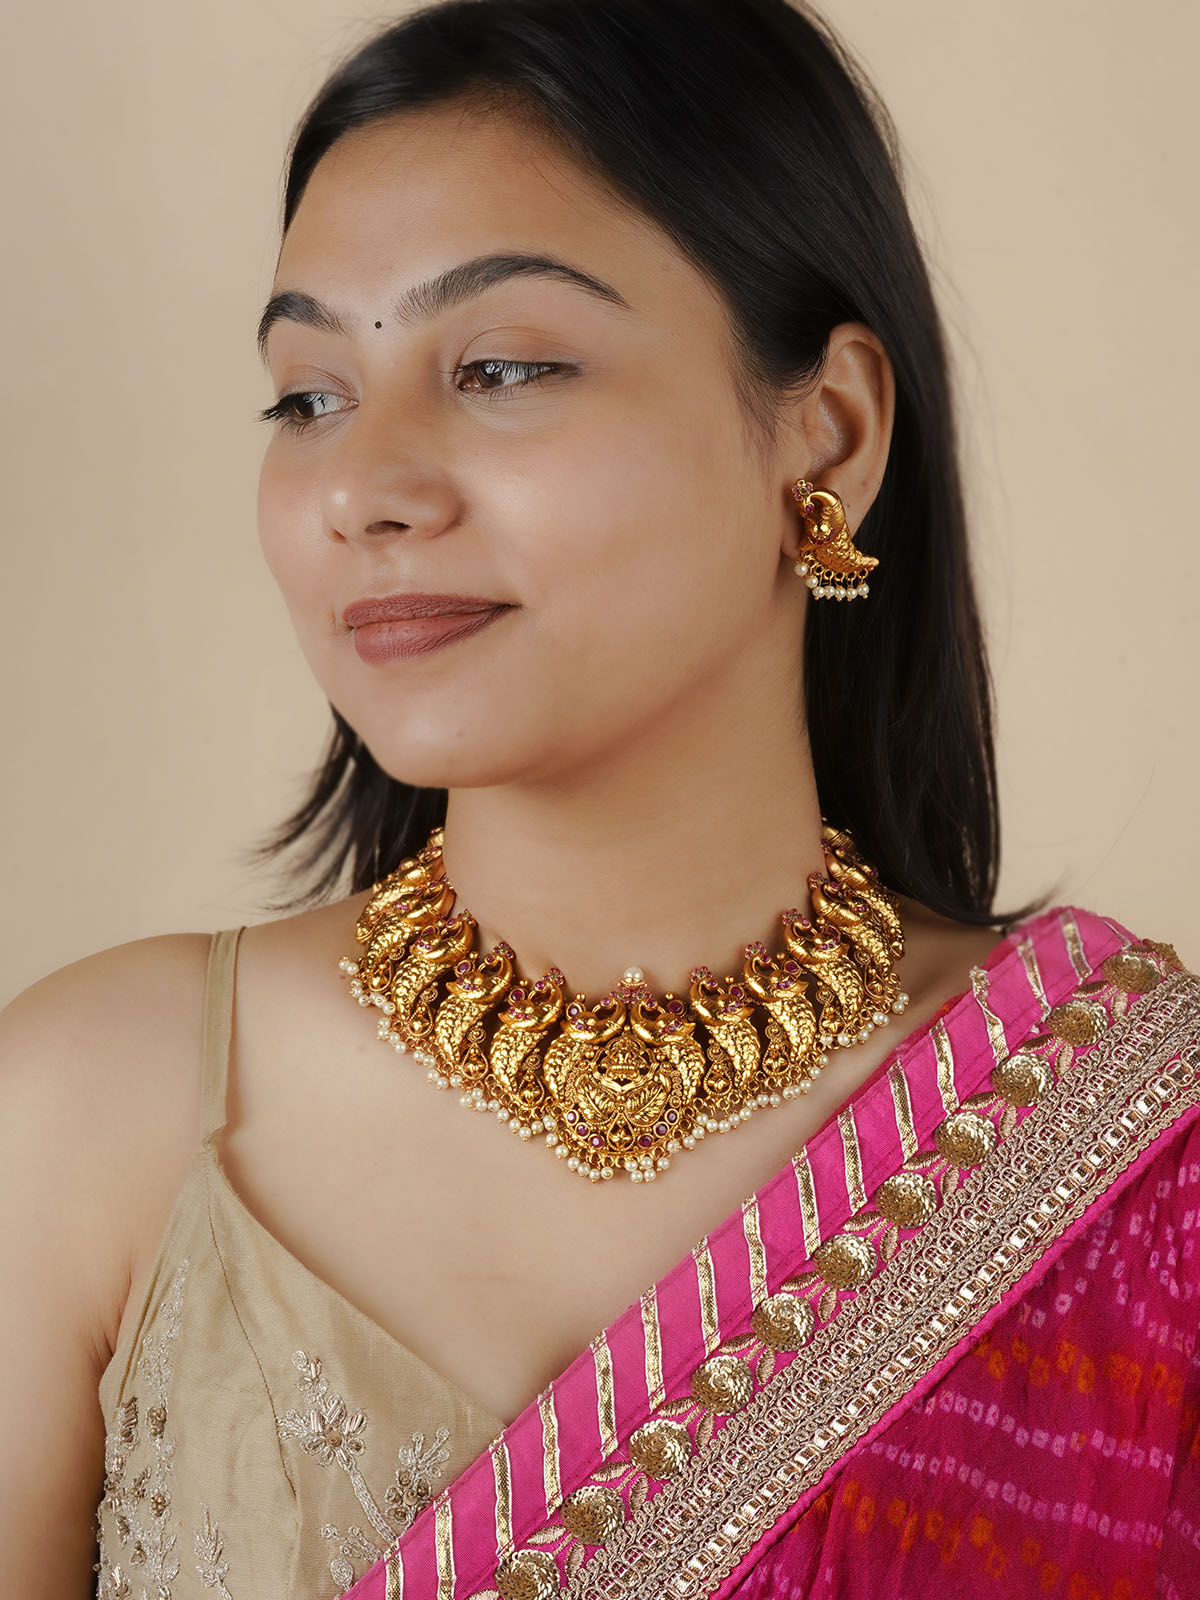 TMPSET267 - Pink Color Gold Plated Temple Necklace Set